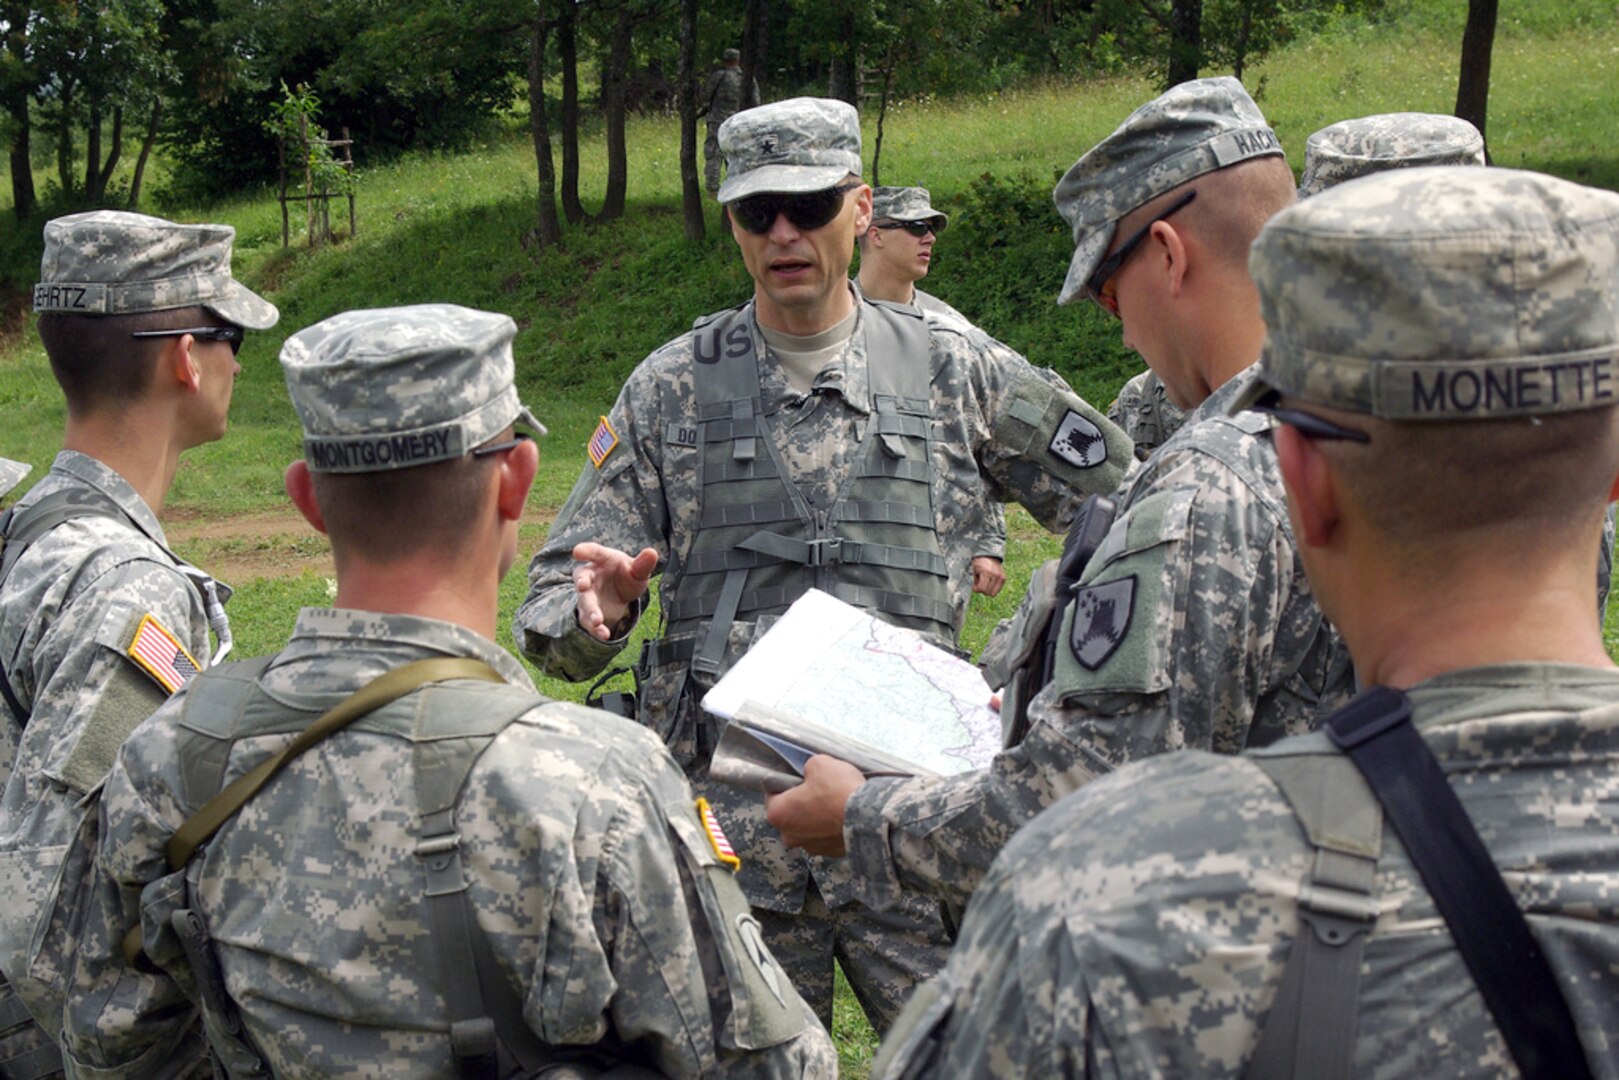 Army Brig. Gen. Al Dohrmann, a North Dakota National Guard member and
commander of Multinational Battle Group East, talks to troops from Bravo
Company, 2nd Platoon, after a patrol near the border between Kosovo and the
Former Yugoslavian Republic of Macedonia during quick reaction force
exercises June 22, 2010. 